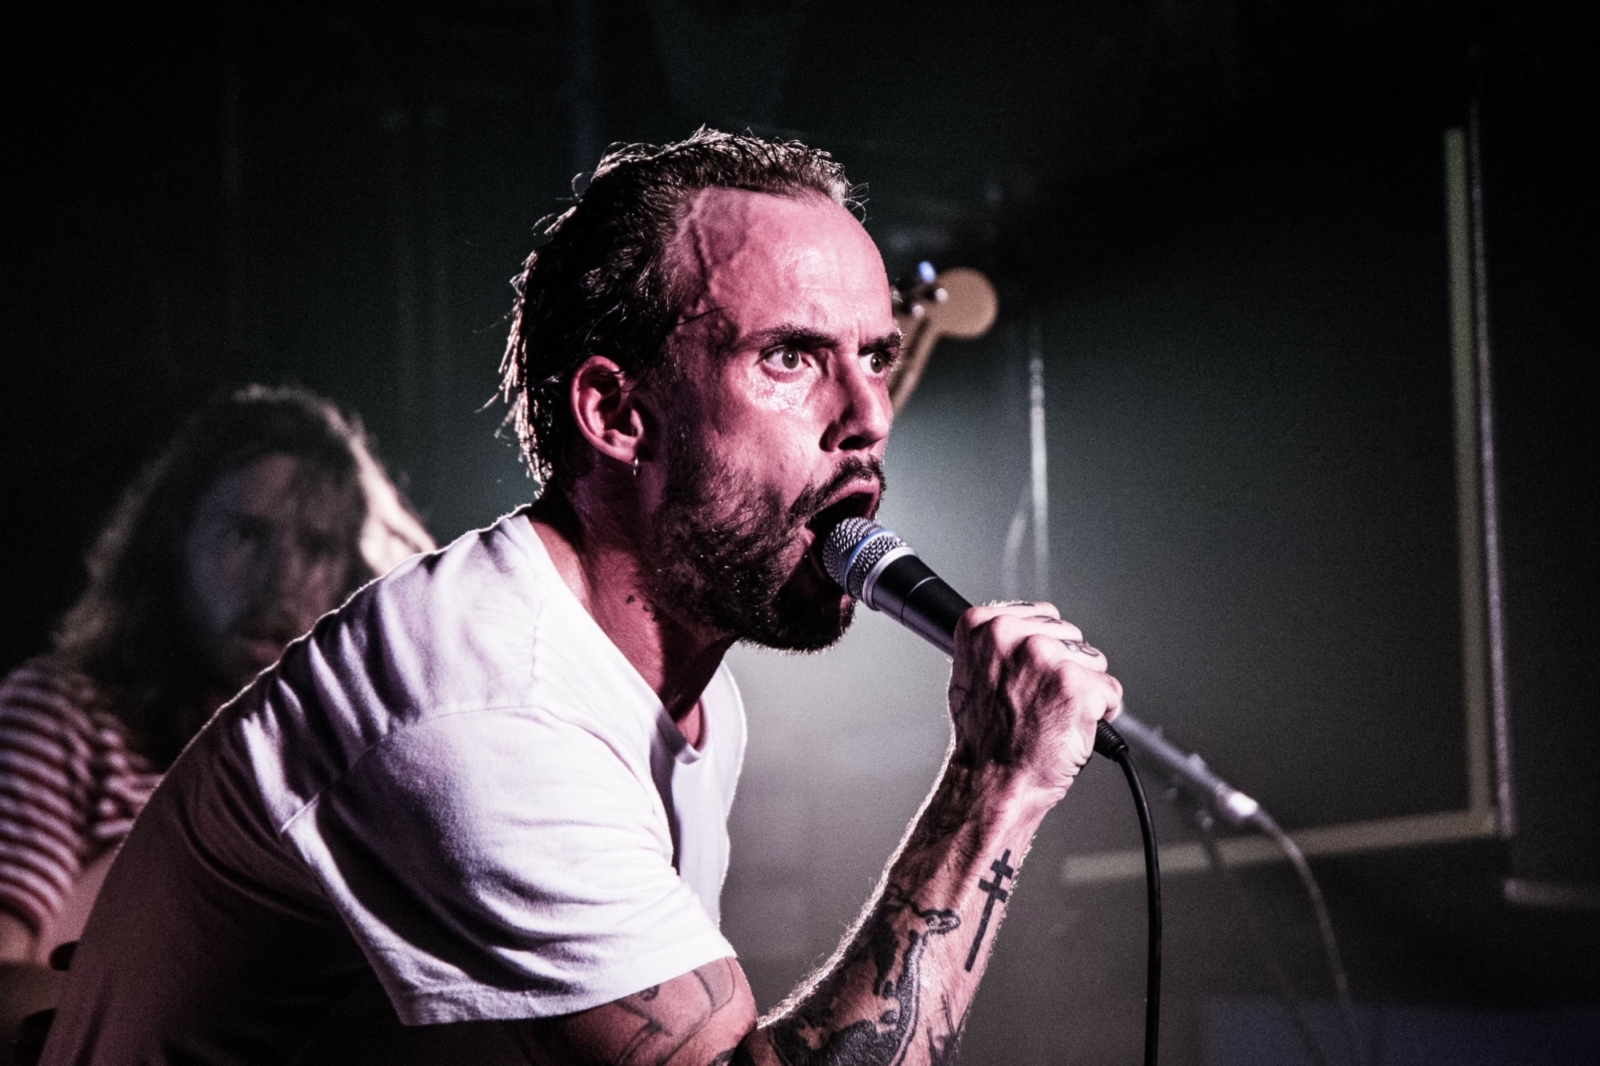 IDLES steal the show at an eclectic and forward-thinking Visions Festival 2018